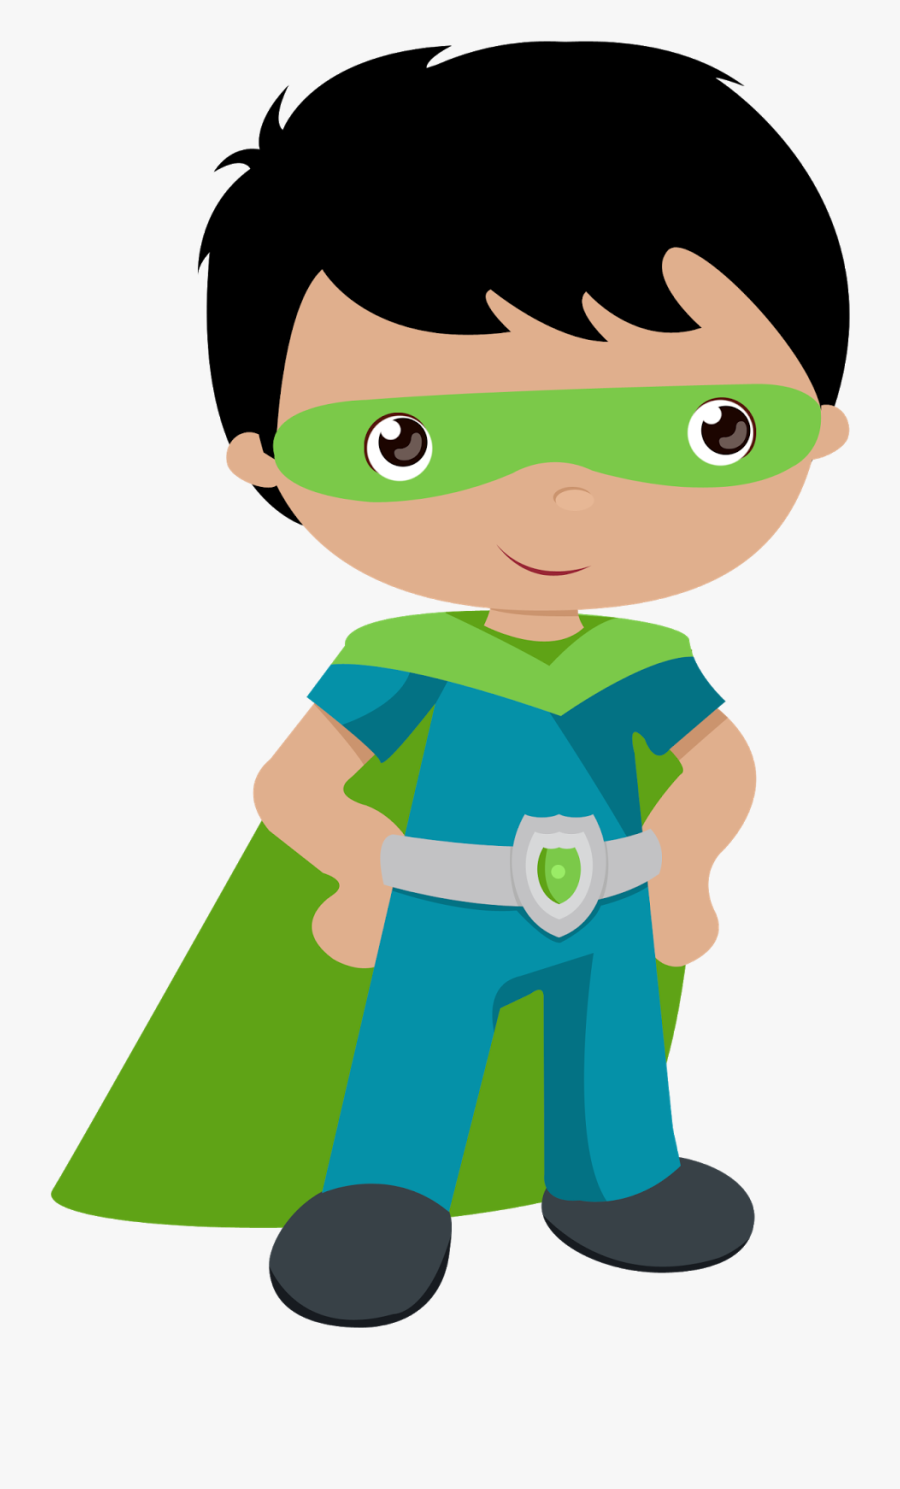 Kids Dressed As Superheroes Clipart Oh My Fiesta For - Super Hero Kids Clipart, Transparent Clipart